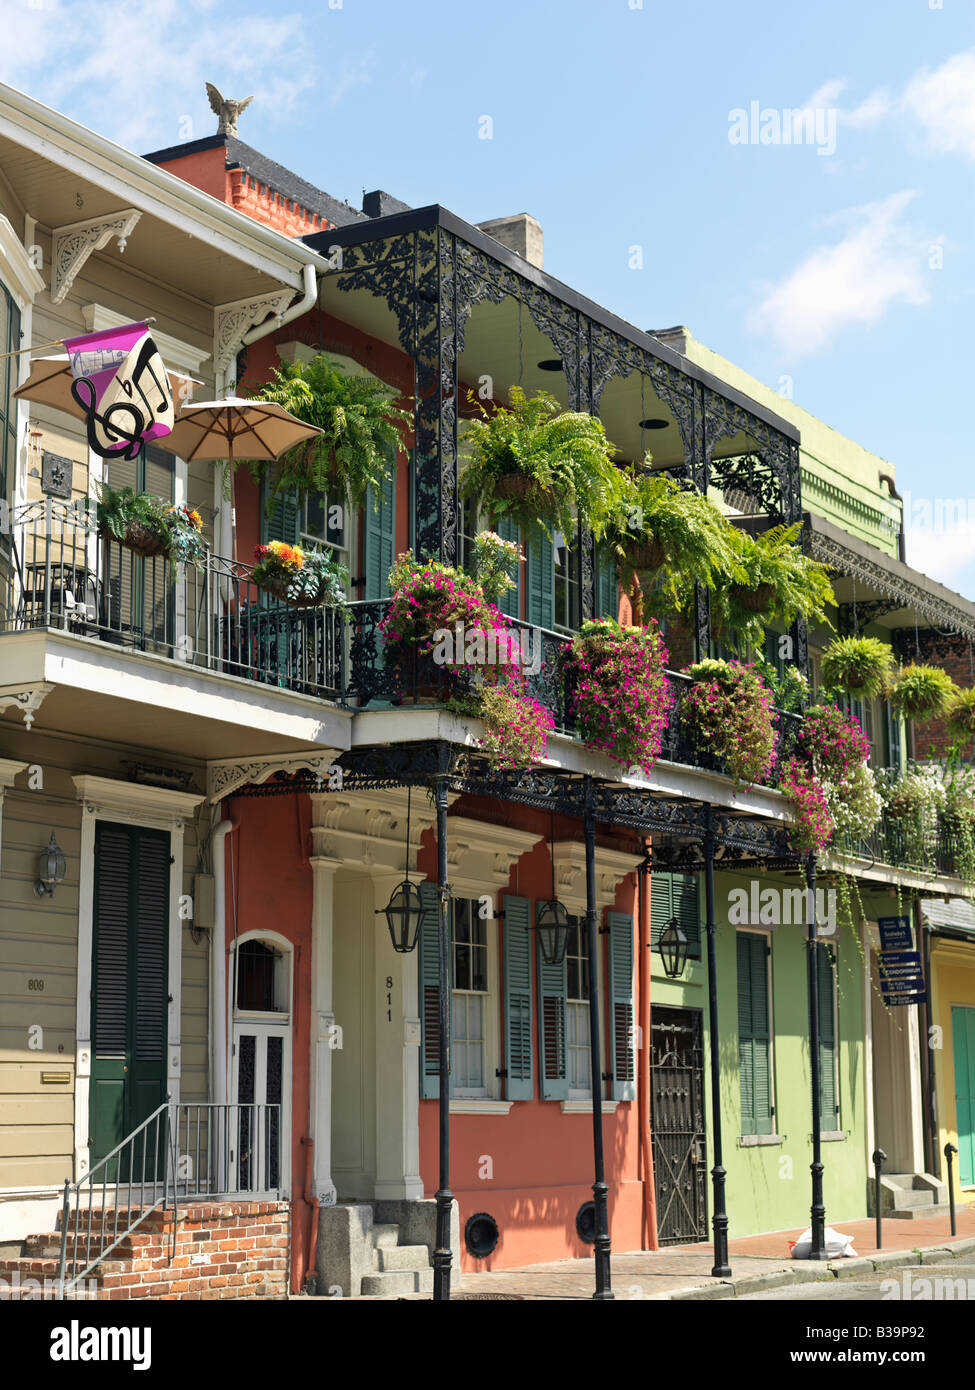 USA,Louisiana New Orleans,colorful French Quarter residential street with wrought iron balconies and hanging flower baskets Stock Photo